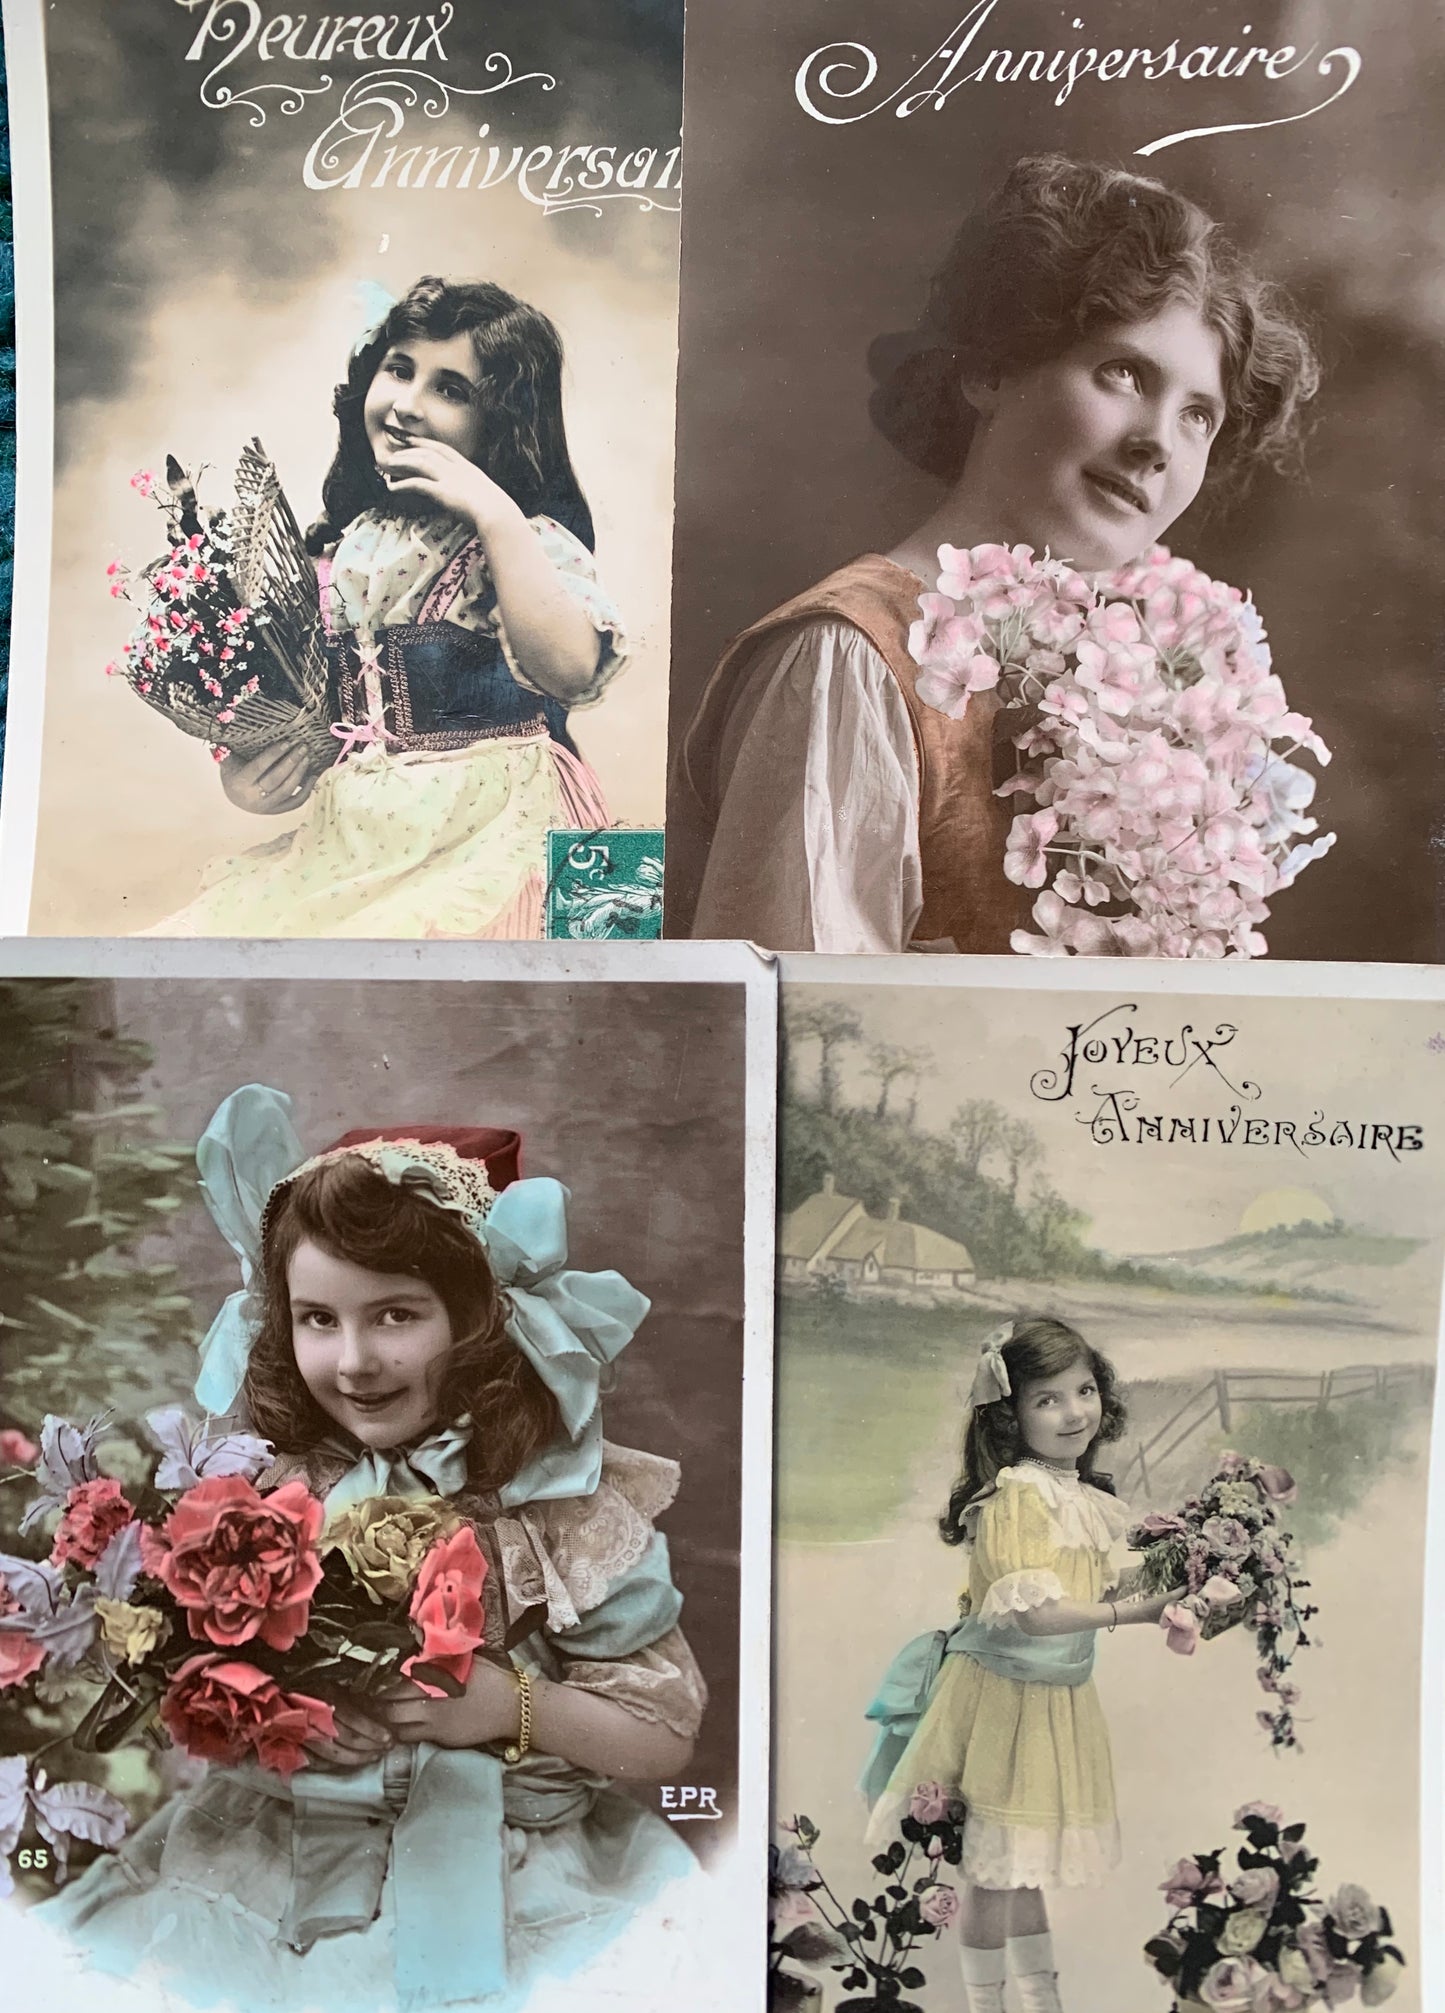 Happy Birthday with Flowers and Little girls on 4 circa 1911 French Postcards   (20)